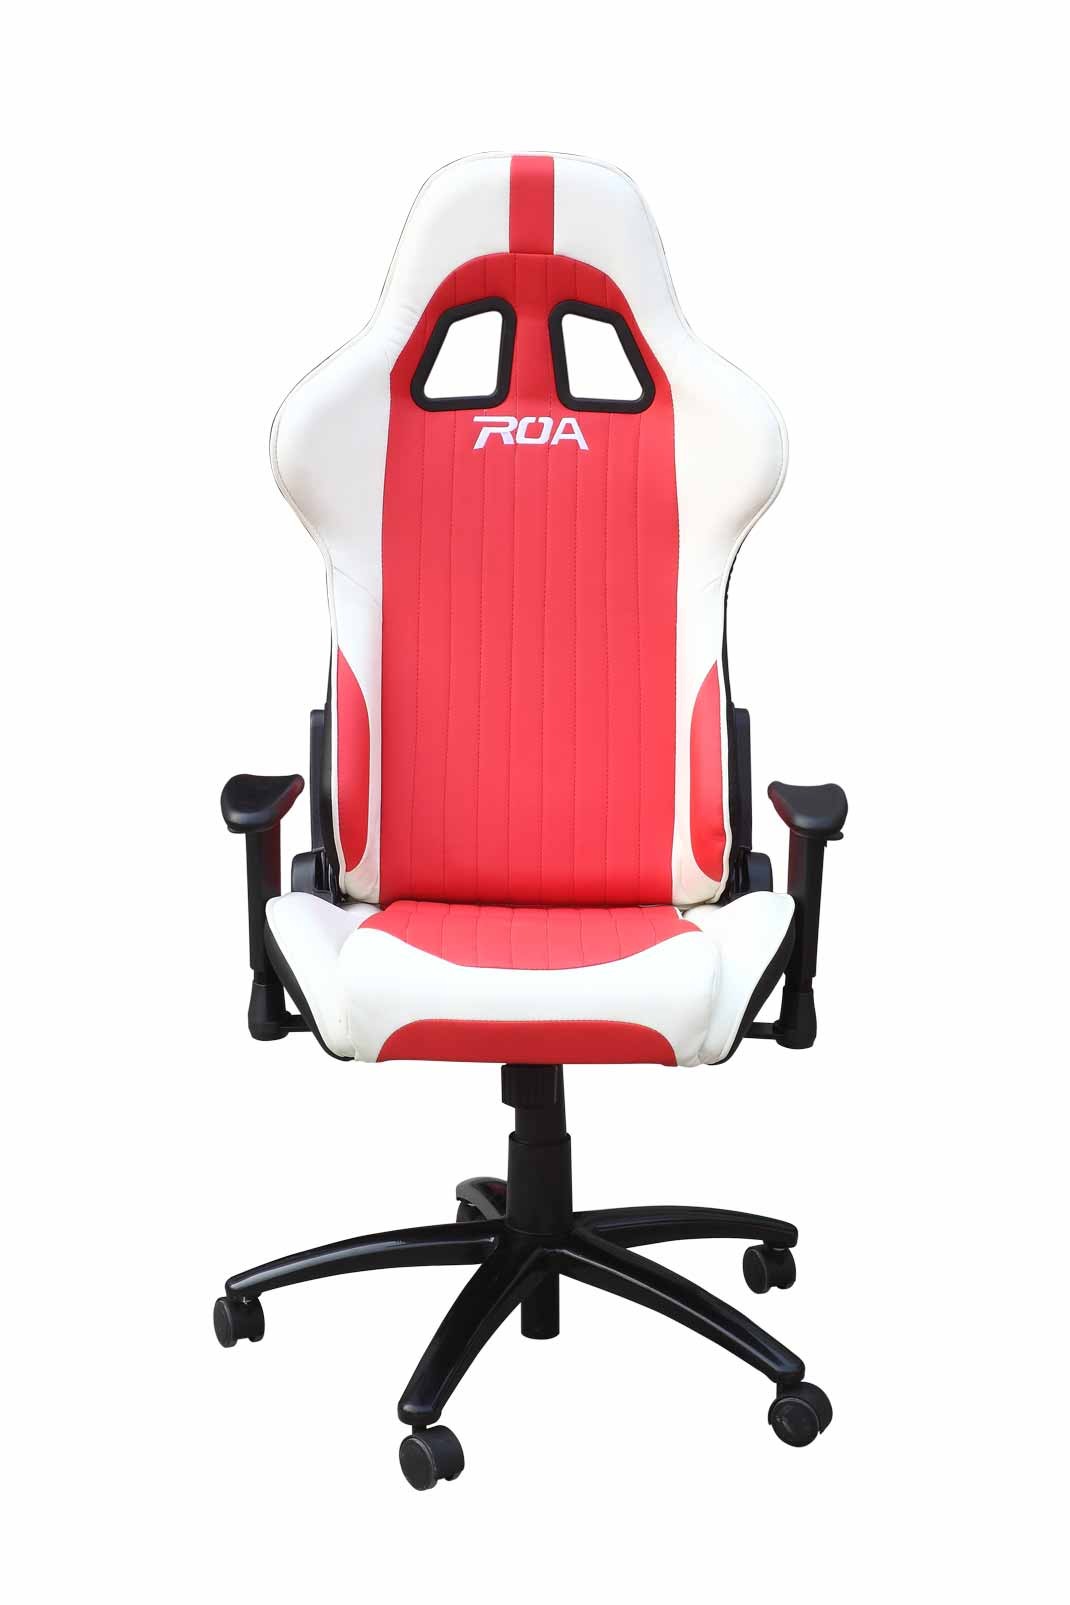 Racing Style Executive Office Chair , Computer Gaming Seat Chair Adjustable